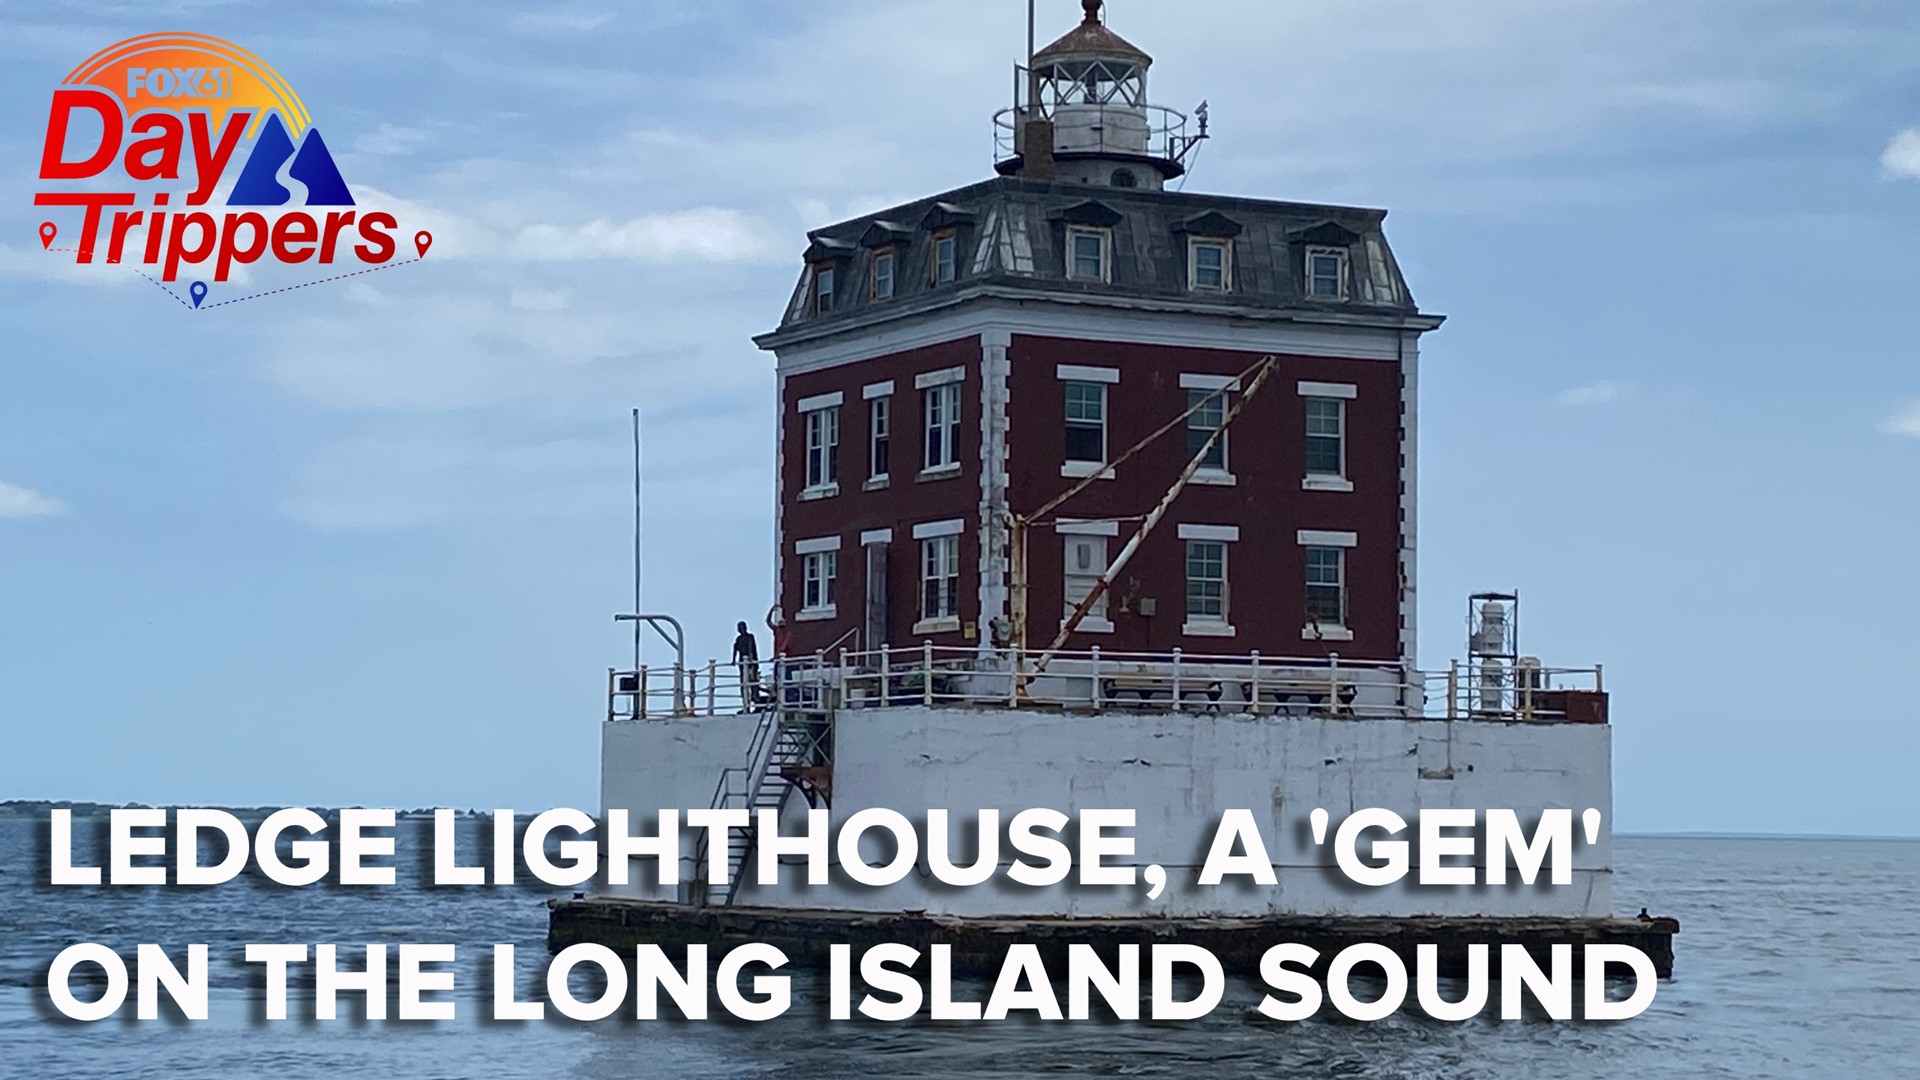 The lighthouse has been a staple in Long island sound for 112 years.